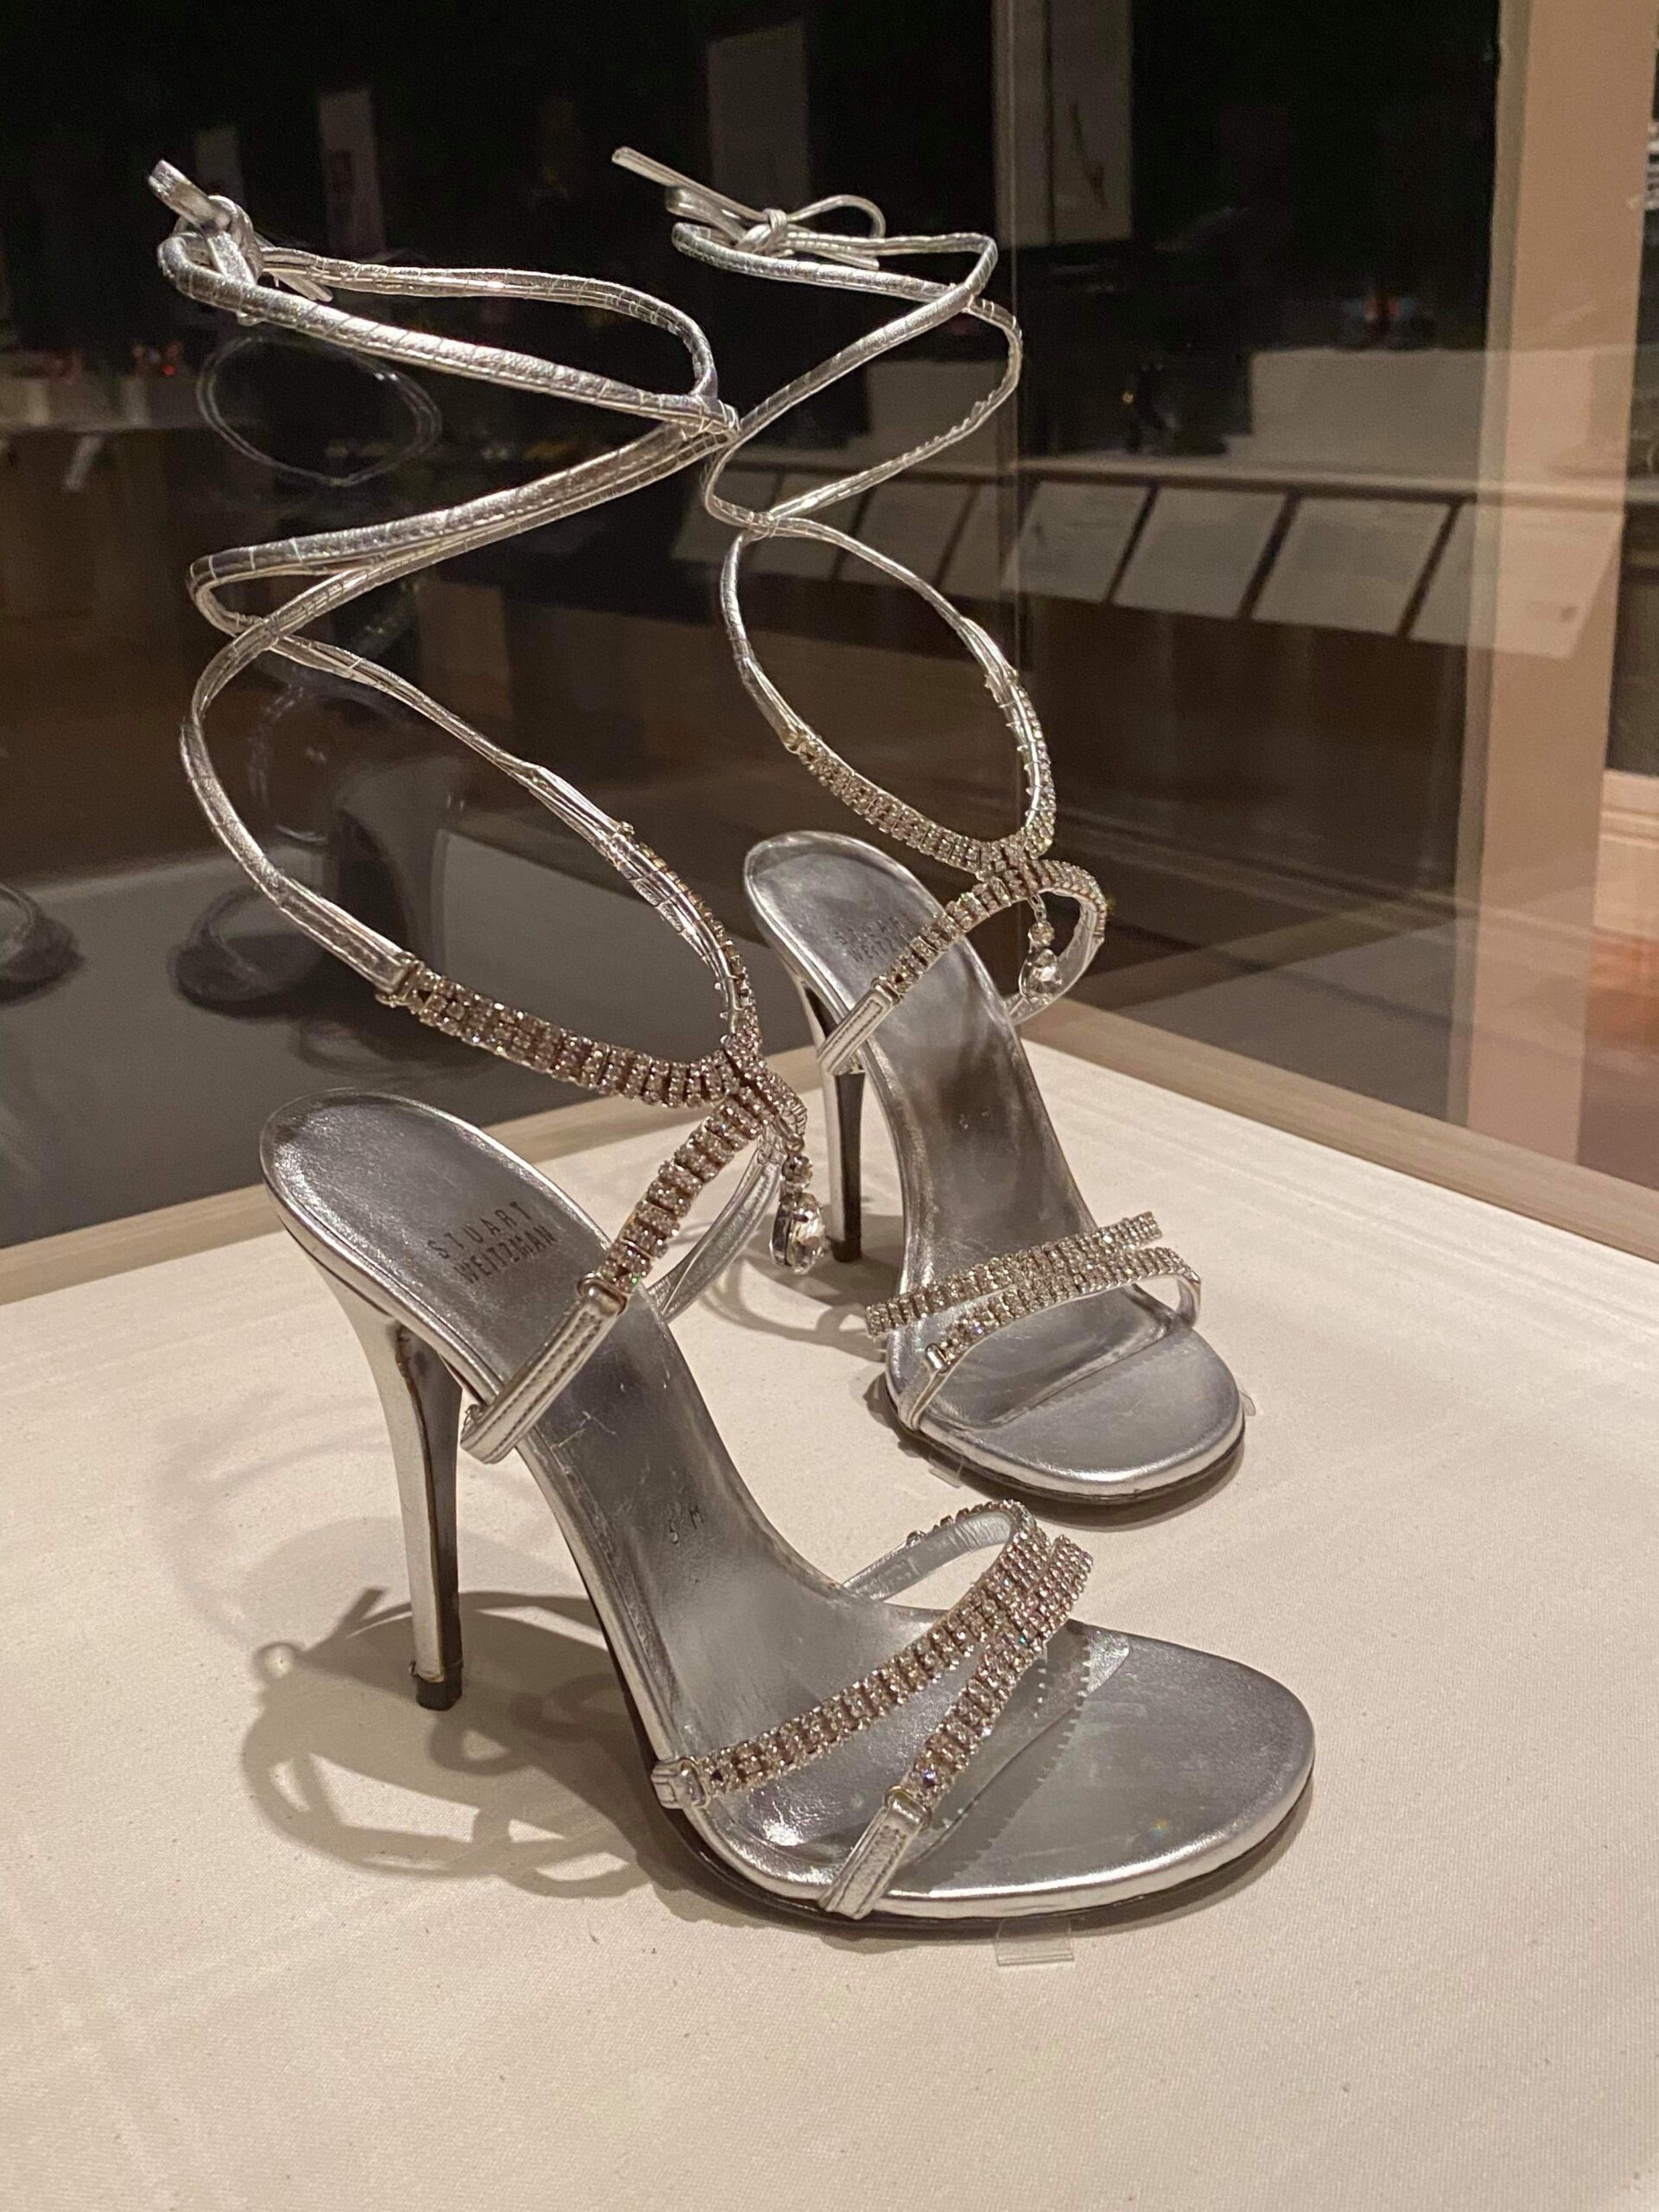 Walk This Way: Footwear from the Stuart Weitzman Collection of Historic ...